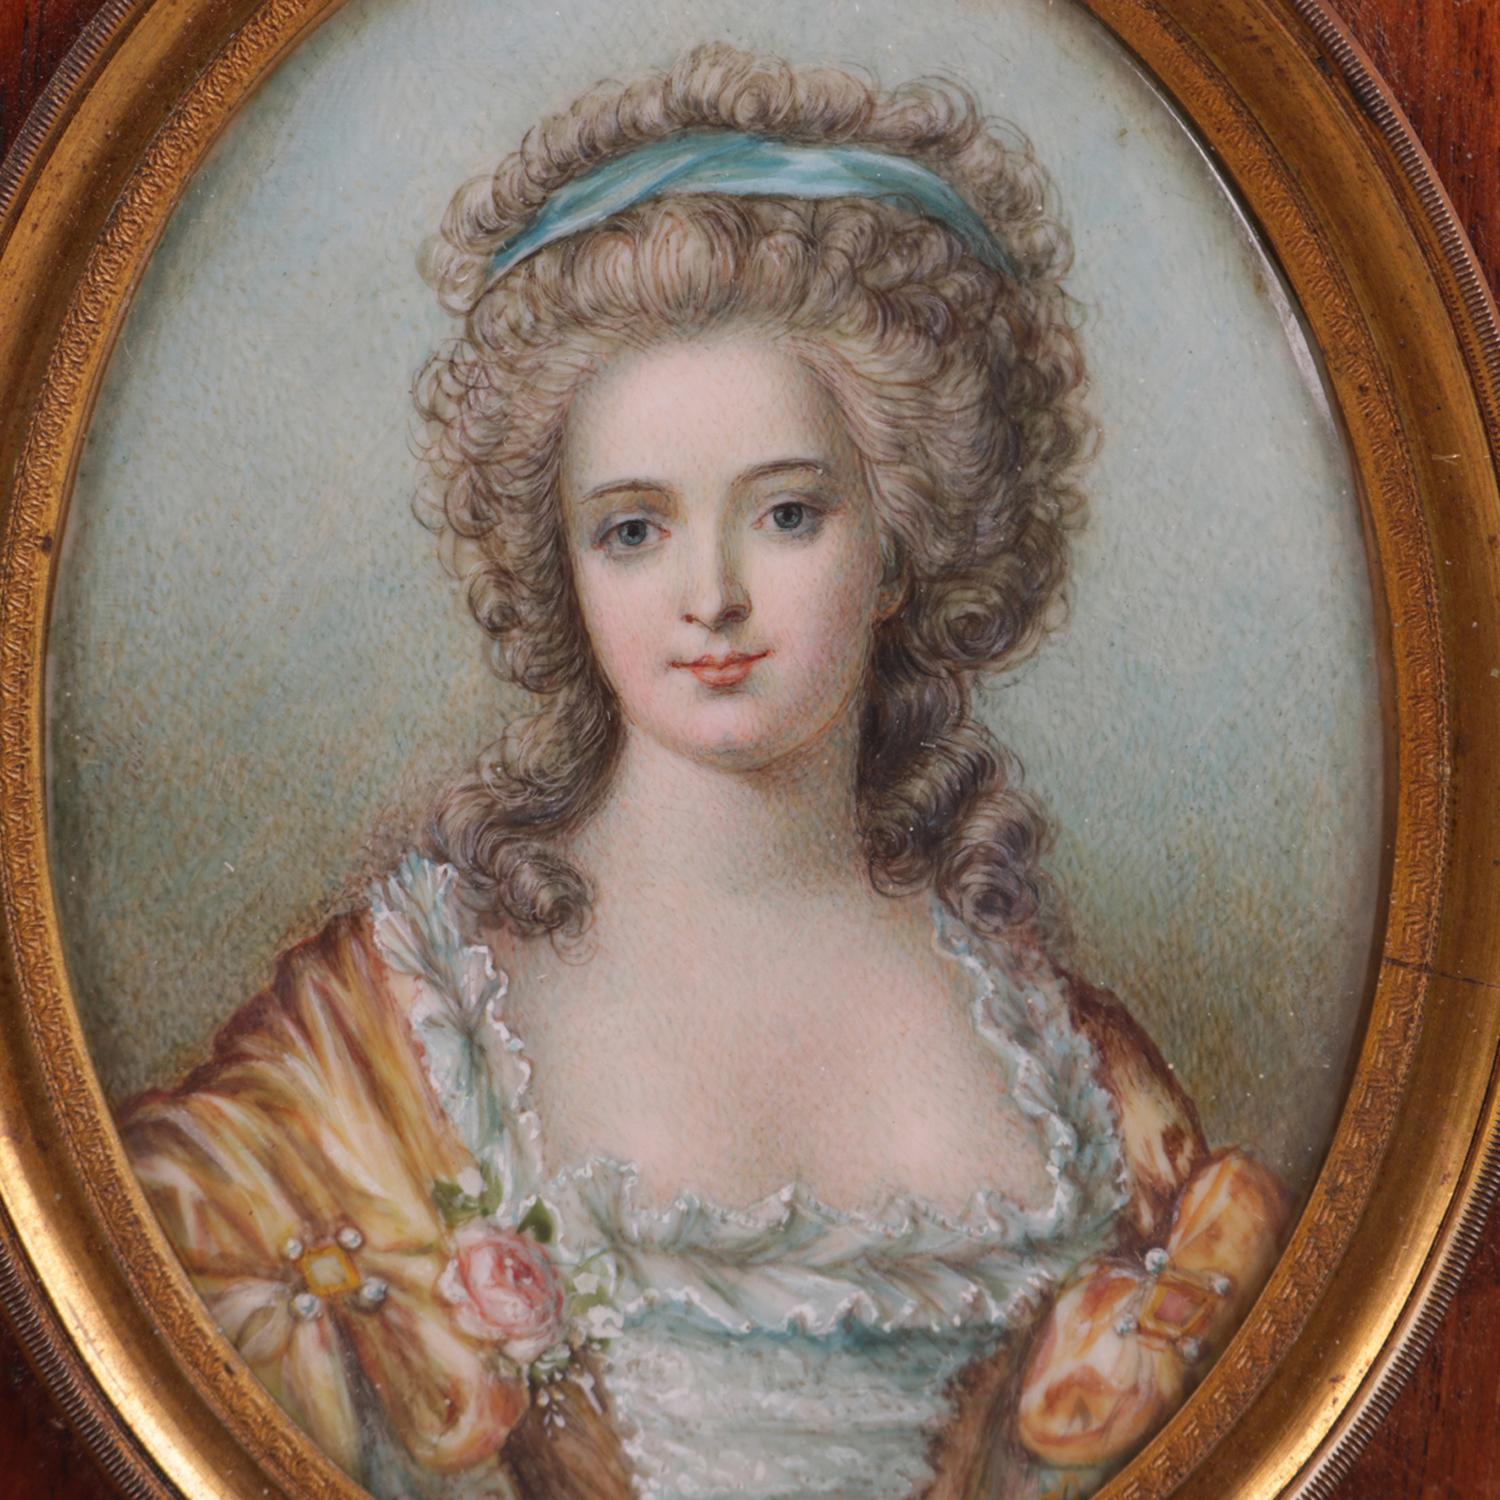 Antique French hand-painted royalty portrait painting on cellulose features the Queen Marie Antoinette, seated in wood frame, reminiscent of Vigee Le Brun (French, 1785-1842), 19th century.

Measures: 6.5